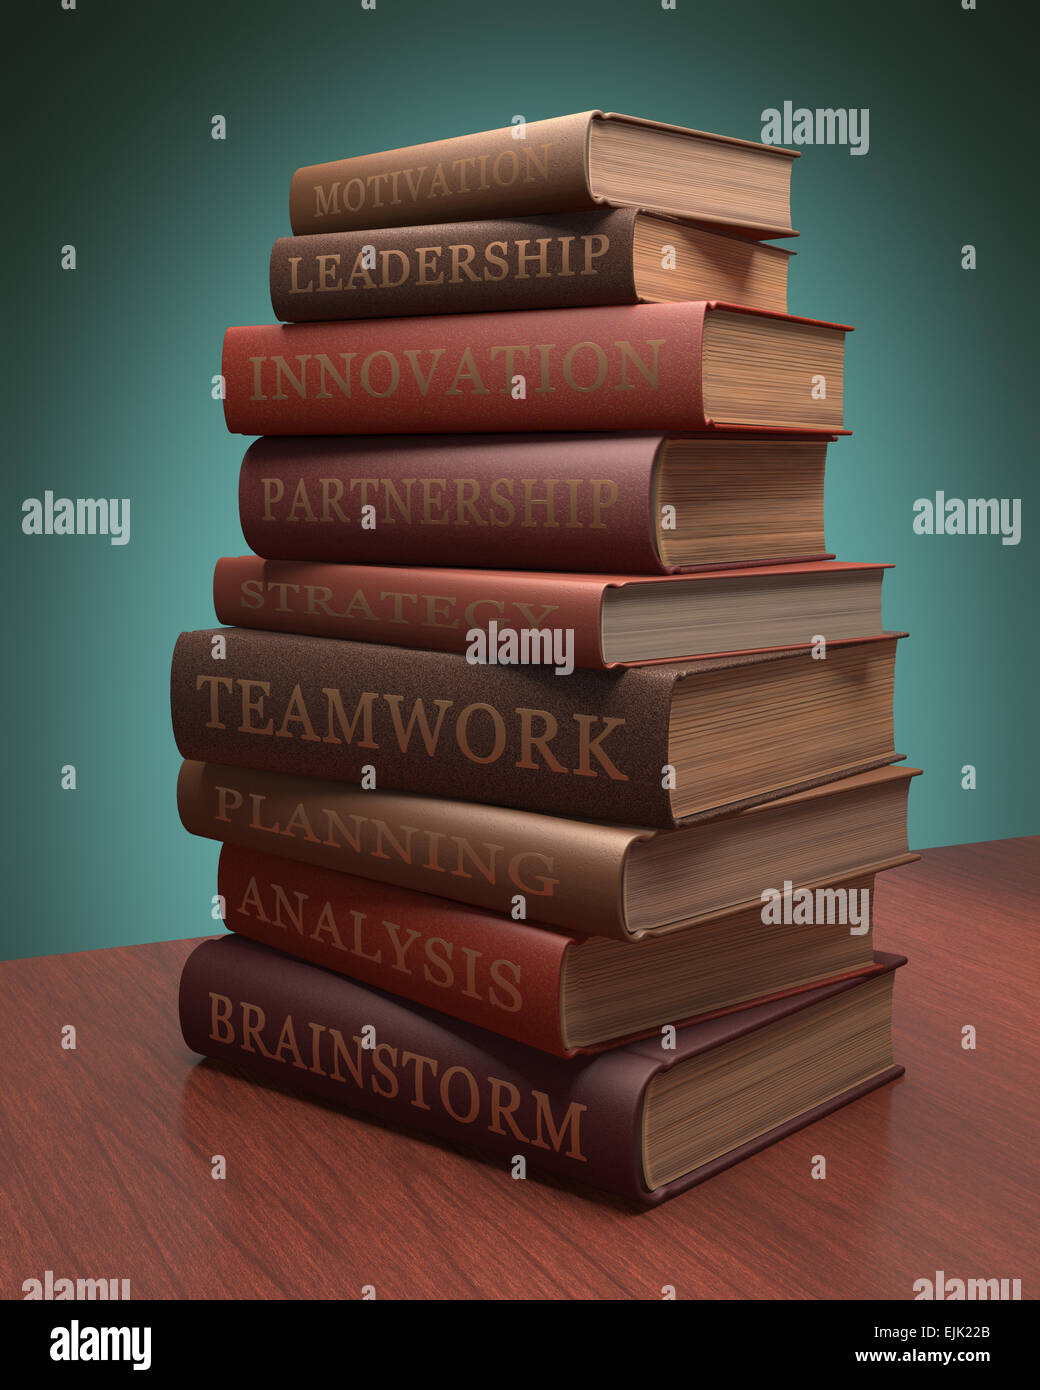 Several books stacked with lessons for achieving success. Clipping path included. Stock Photo